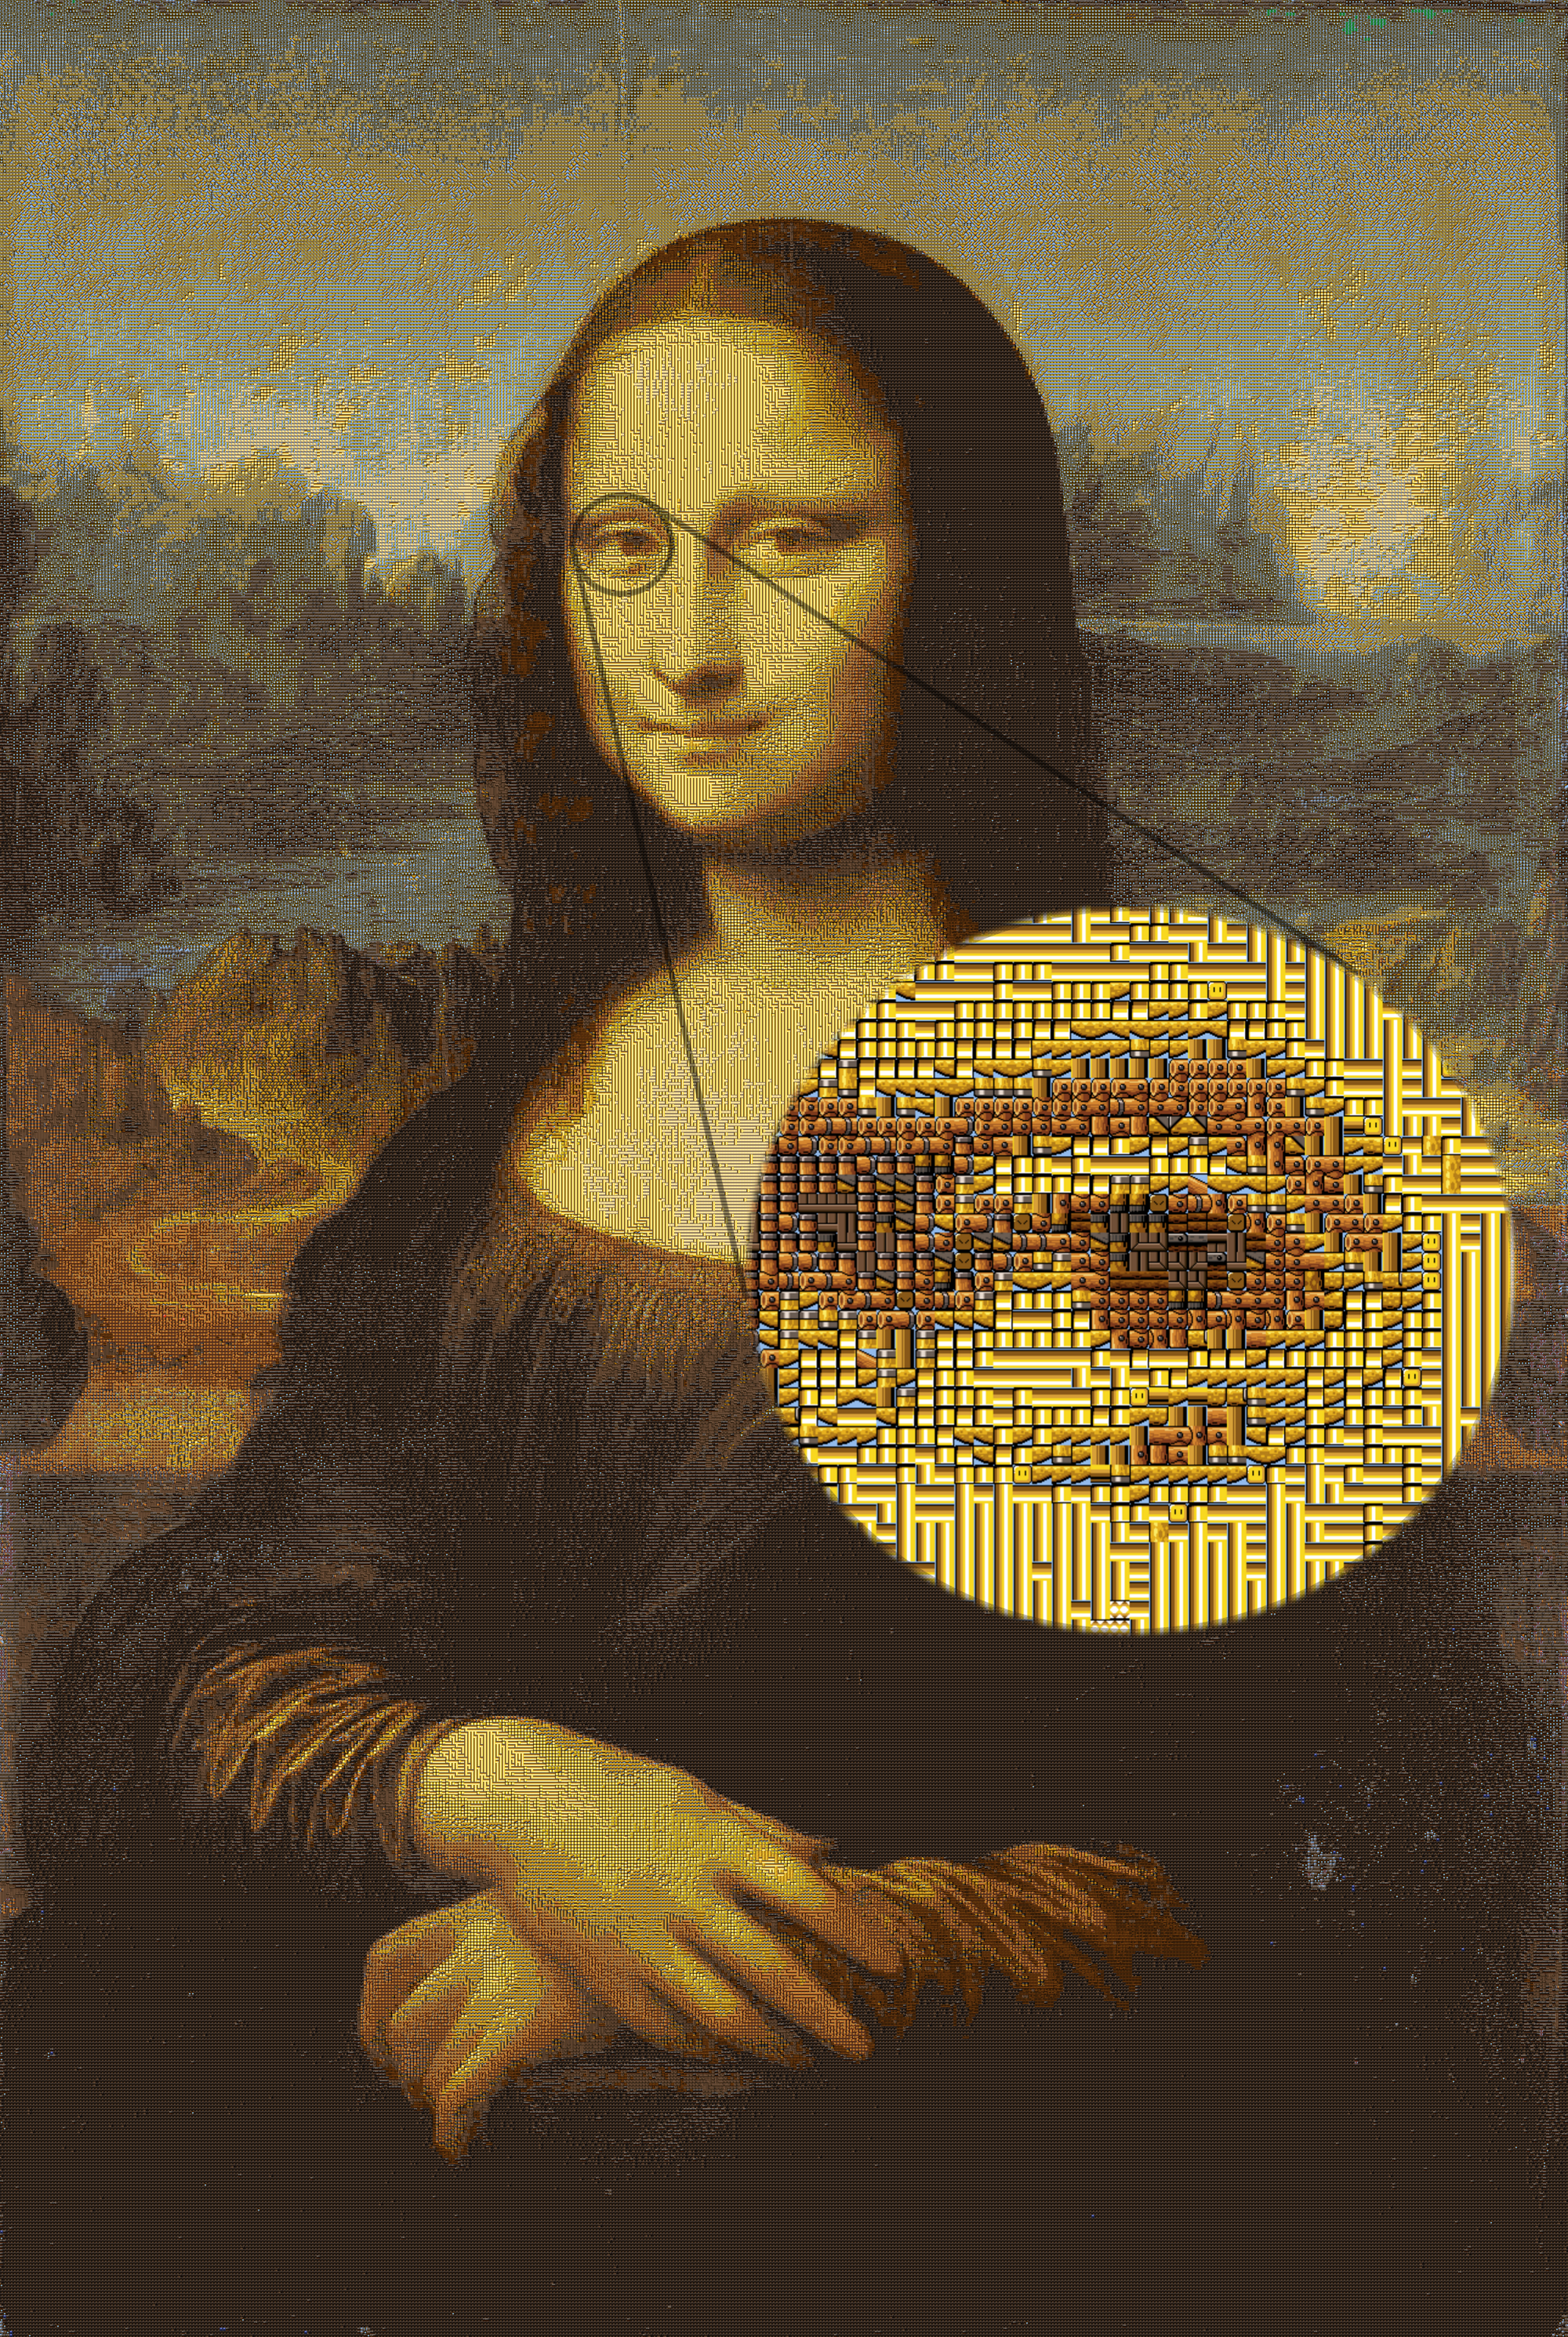 The Mona Lisa has been recreated using sprites from Super Mario World in  Super Mario Maker 2 | The GoNintendo Archives | GoNintendo